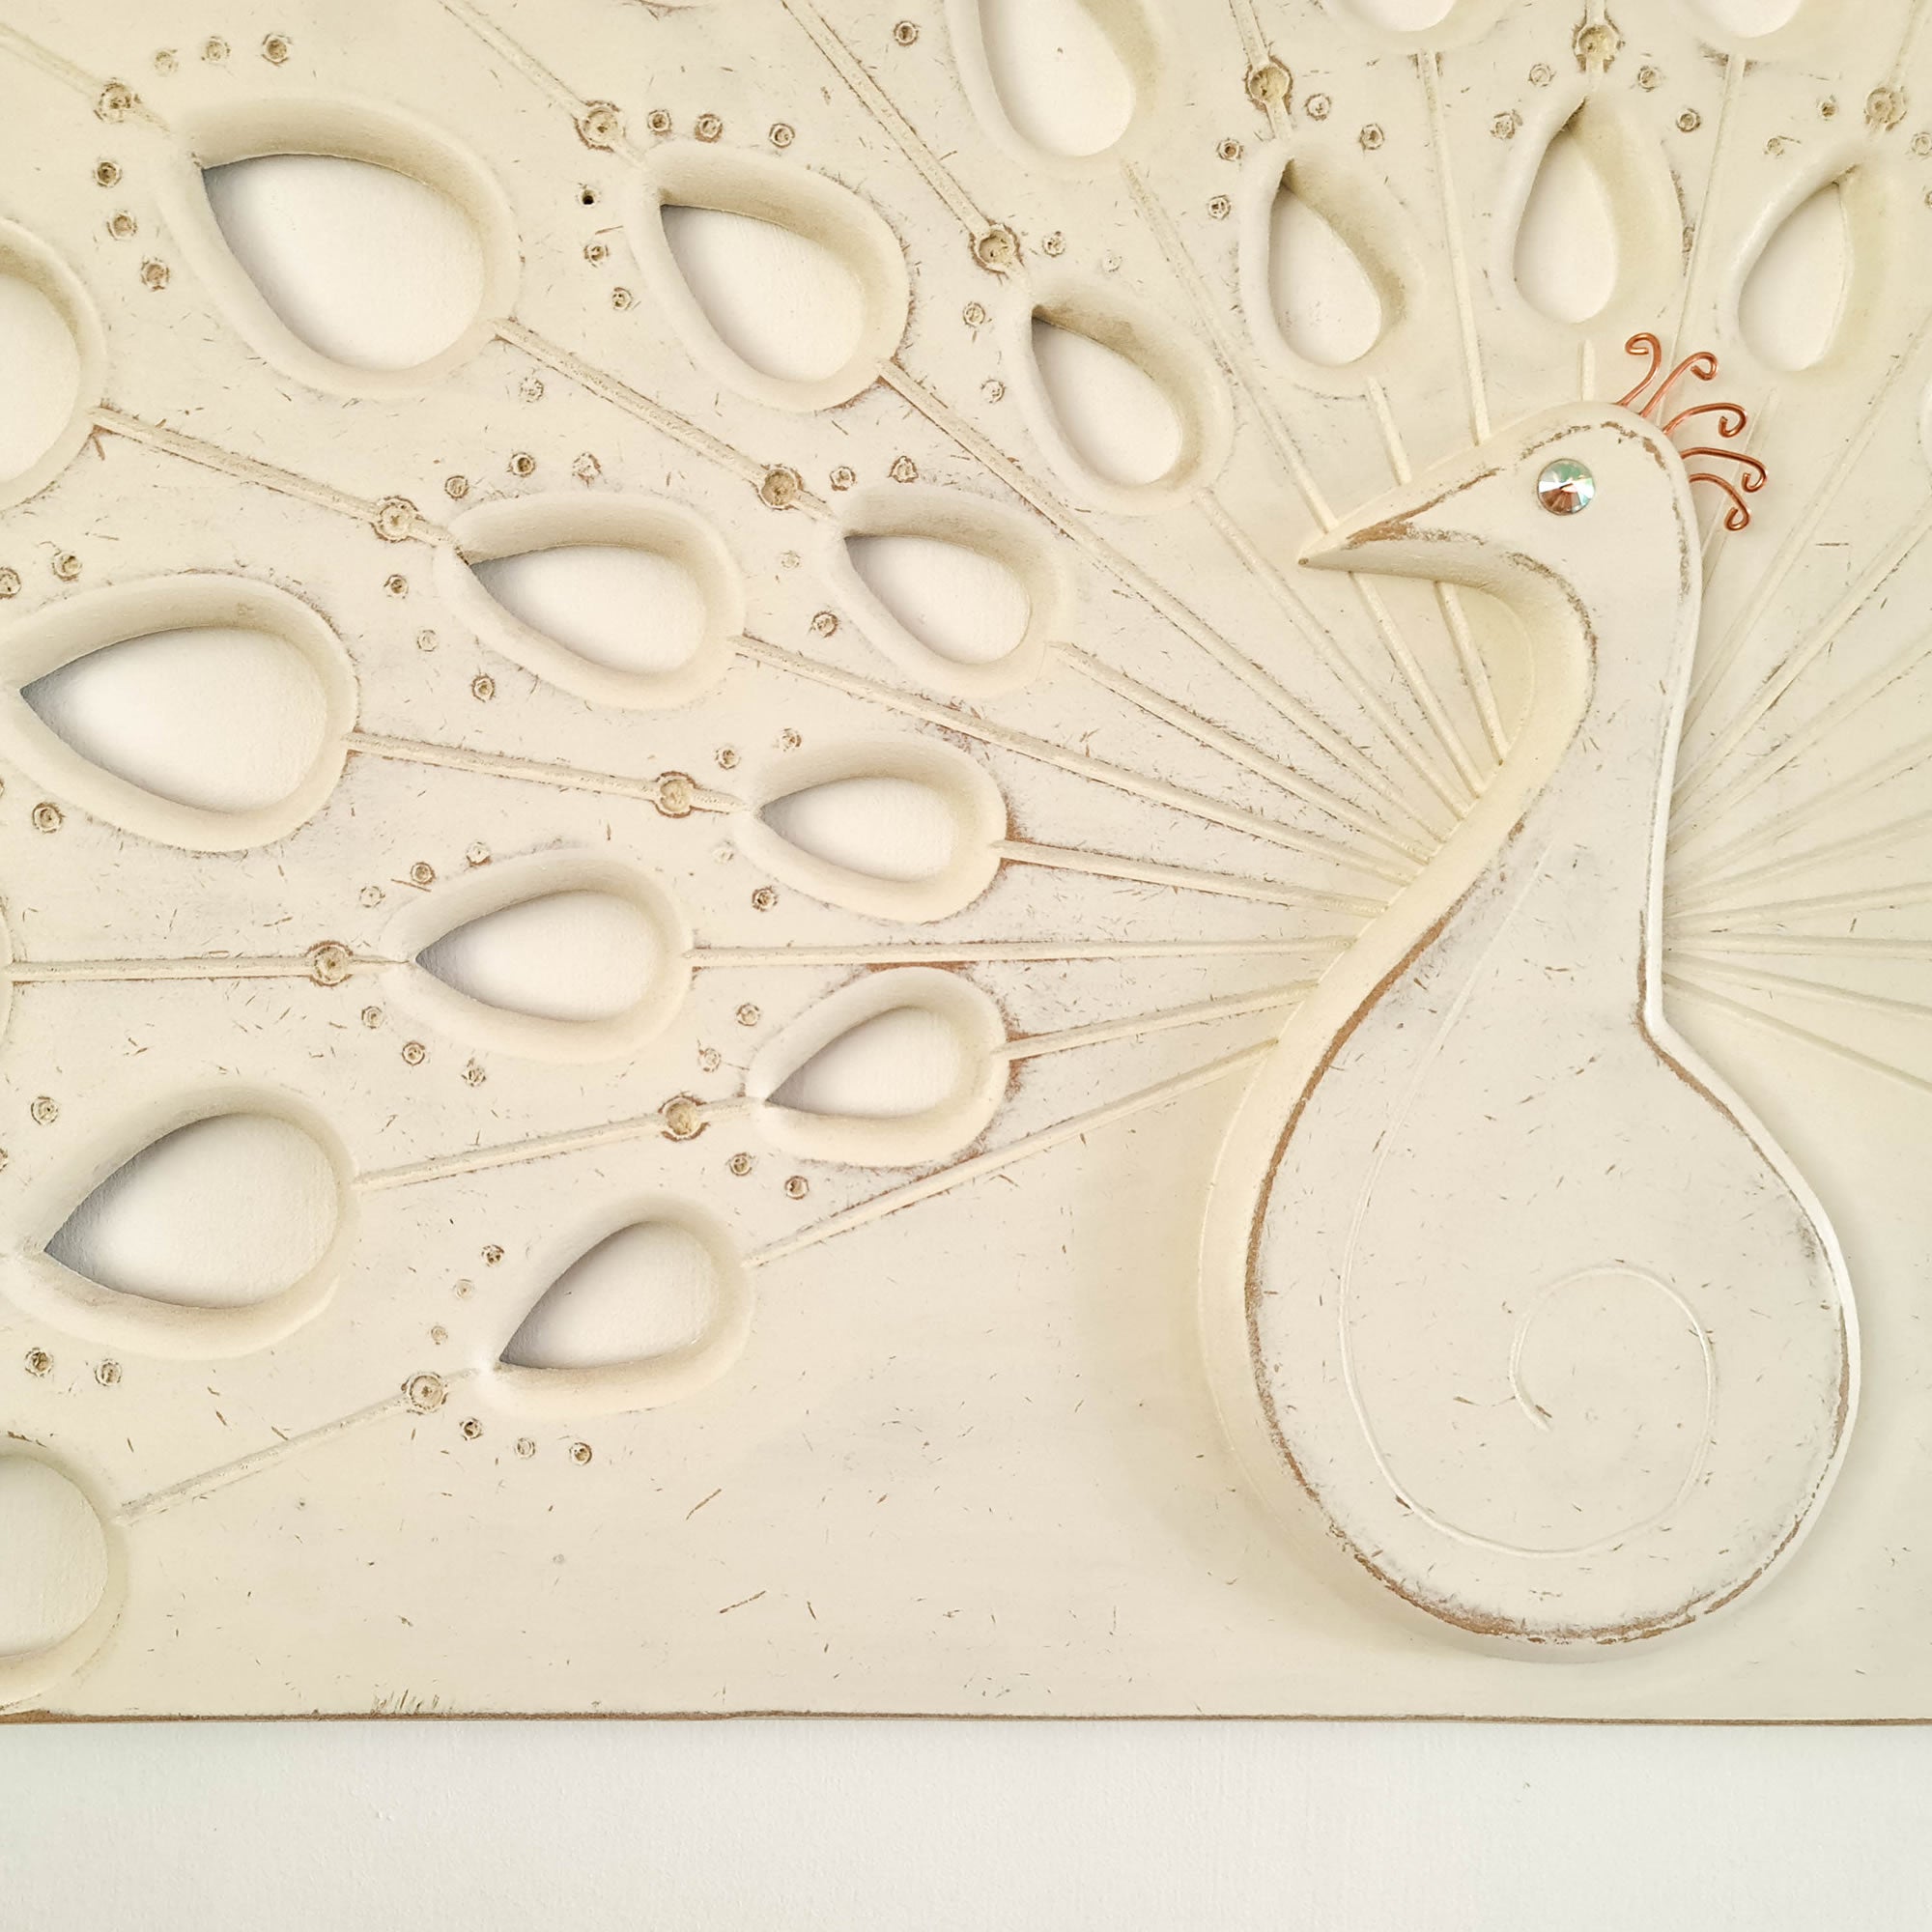 Peacock Hand Carved Wooden Decorative Sculpture Wall Art Distressed White Headboard Shabby Chic